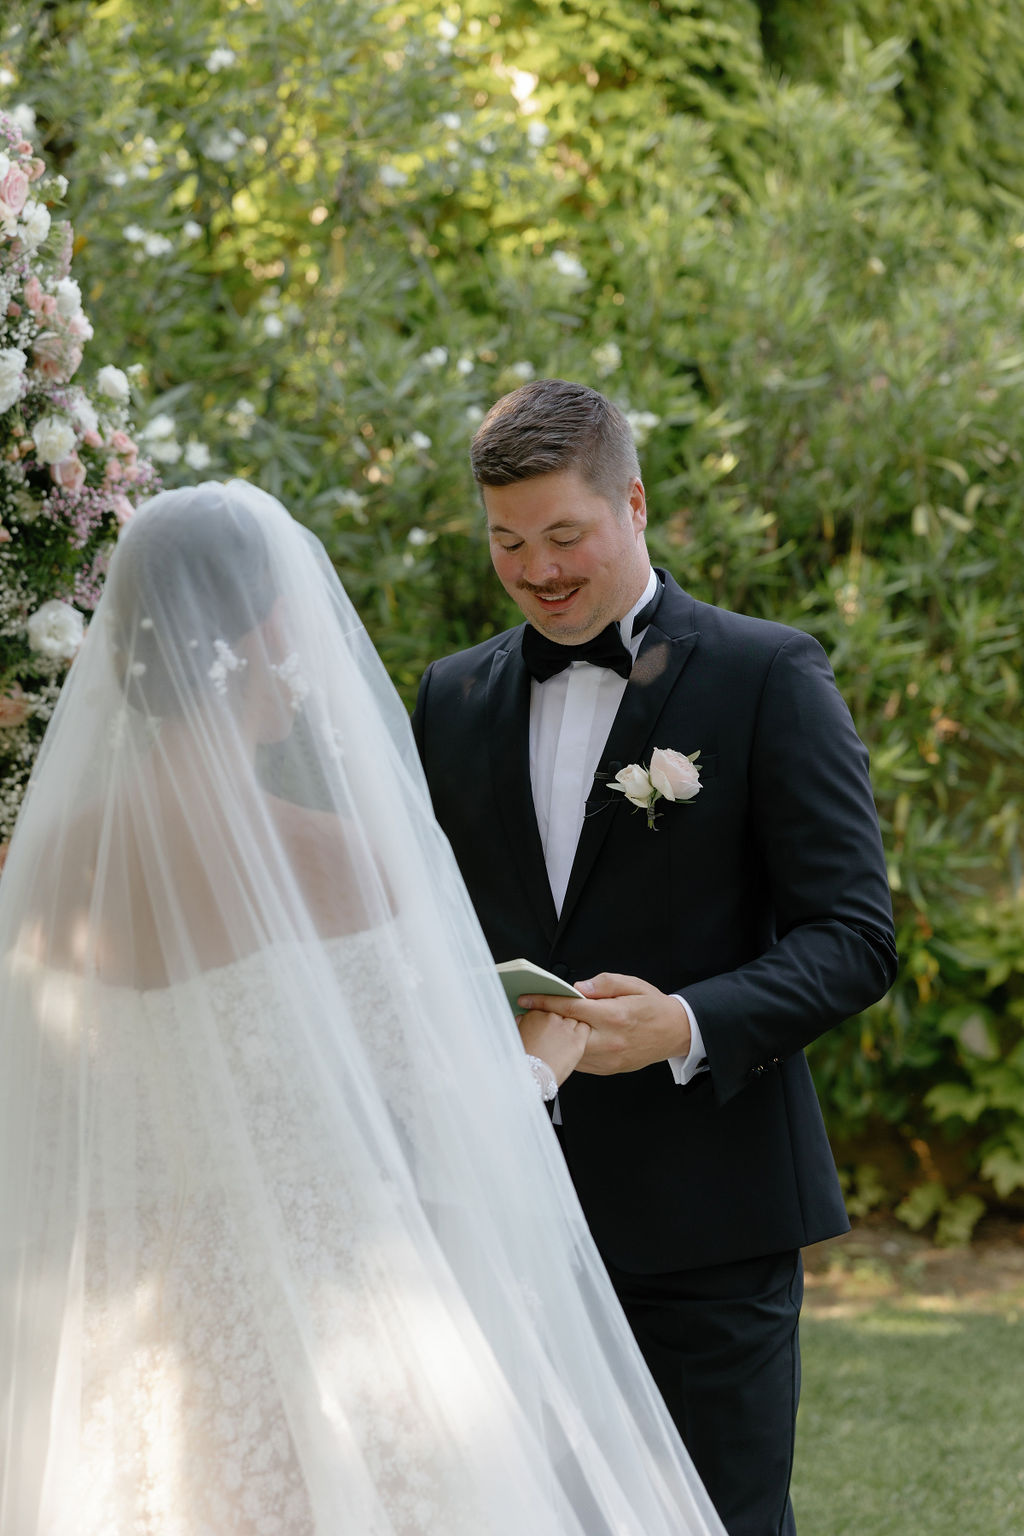 Groom reading vows at French destination wedding in Provence